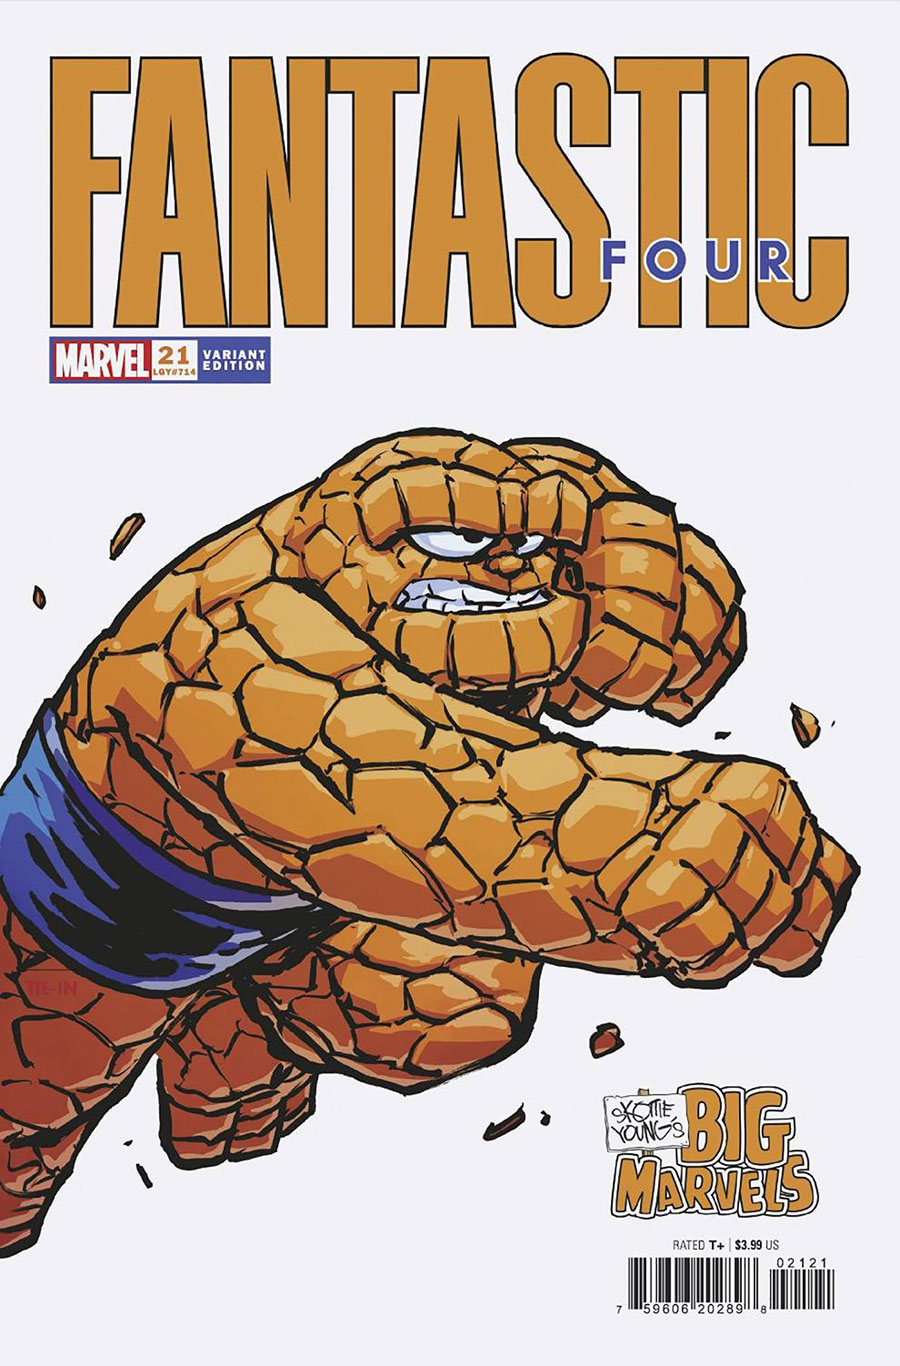 Fantastic Four Vol 7 #21 Cover B Variant Skottie Youngs Big Marvel Cover (Blood Hunt Tie-In)